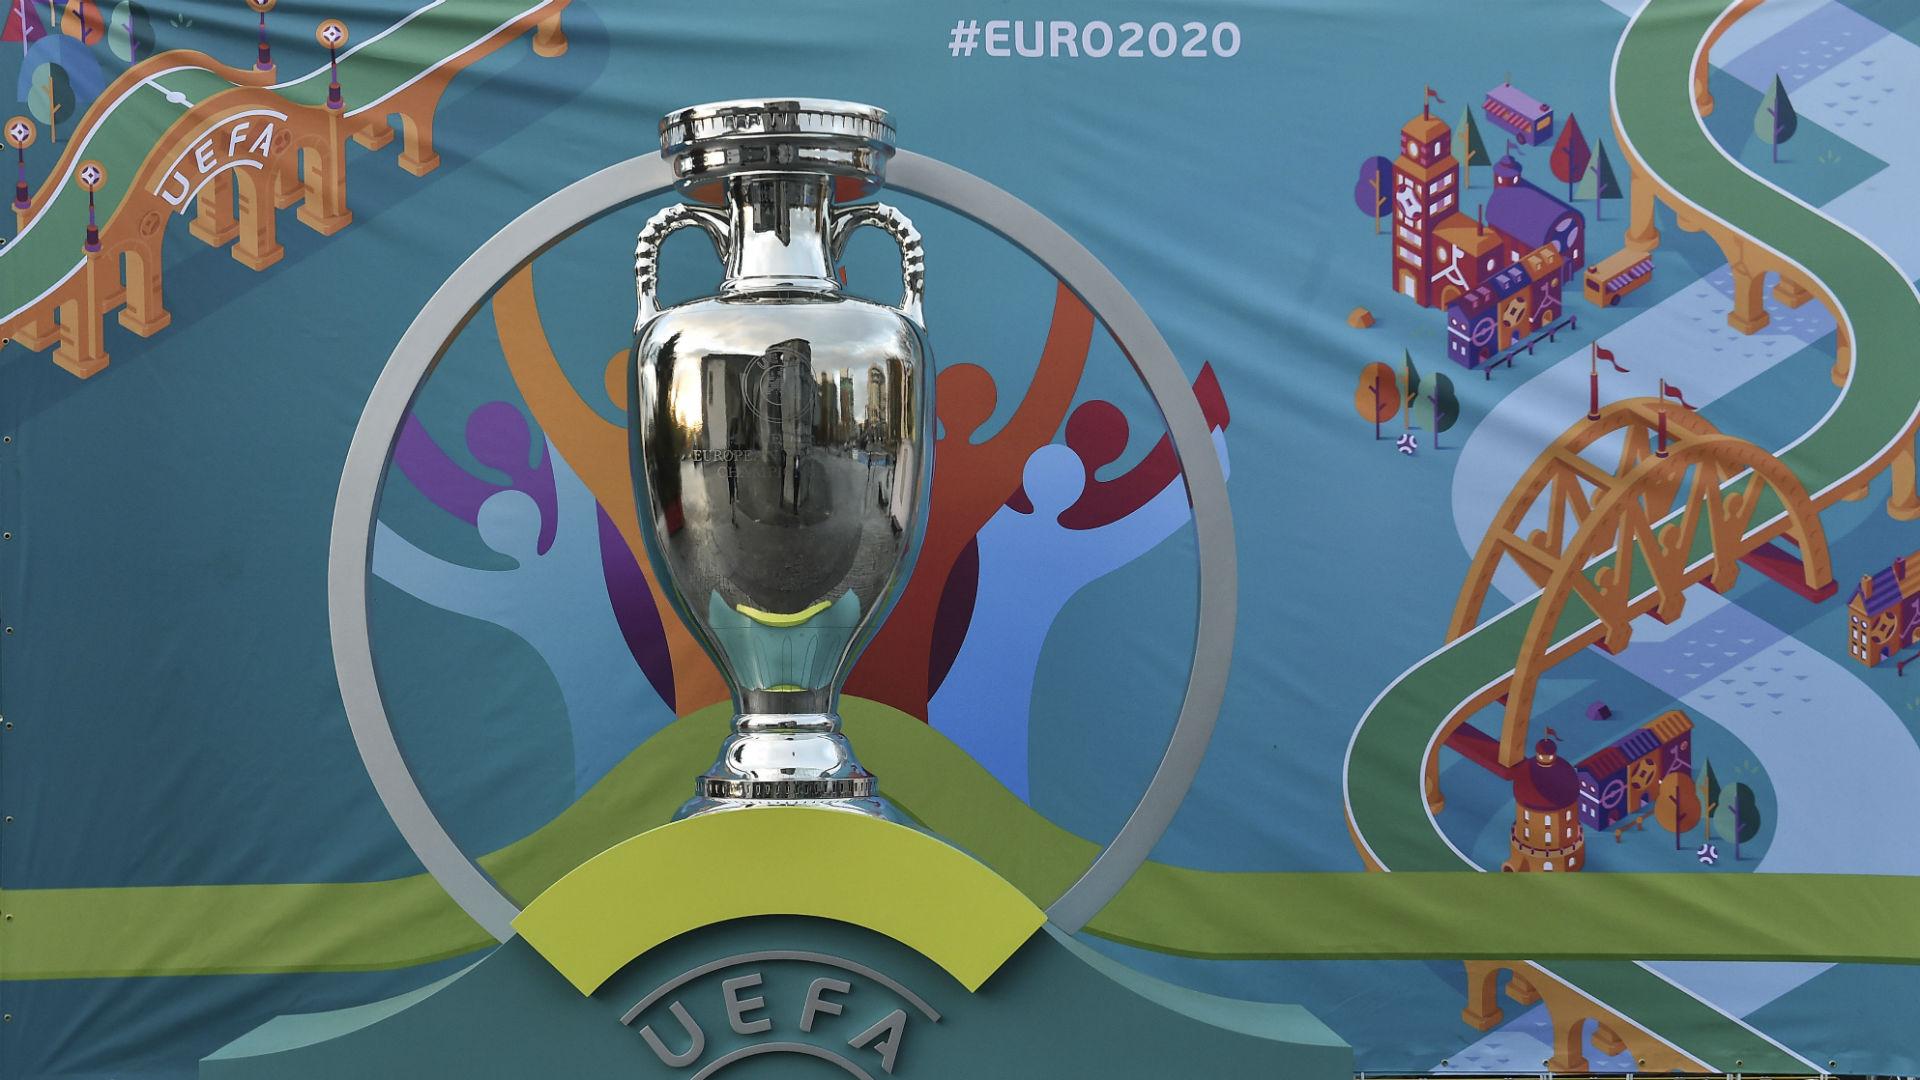 Euro 2020 tickets: How to apply for tickets & full list of